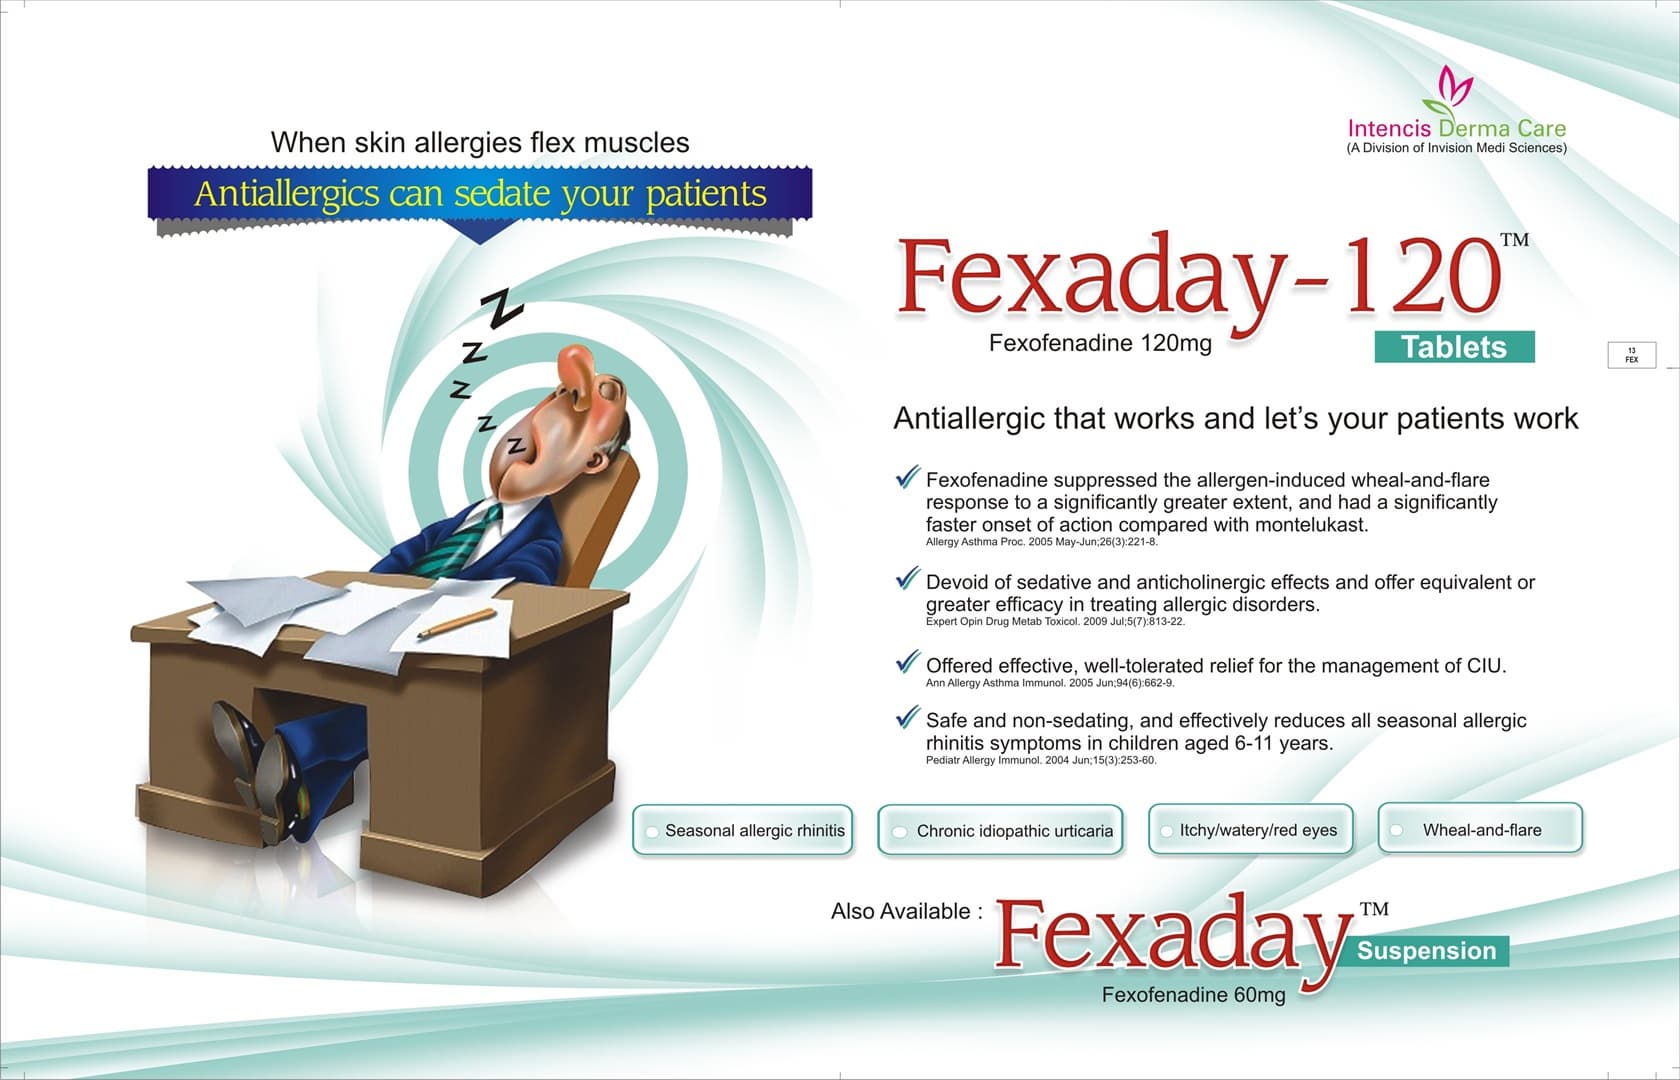 Fexaday_120 Tablets